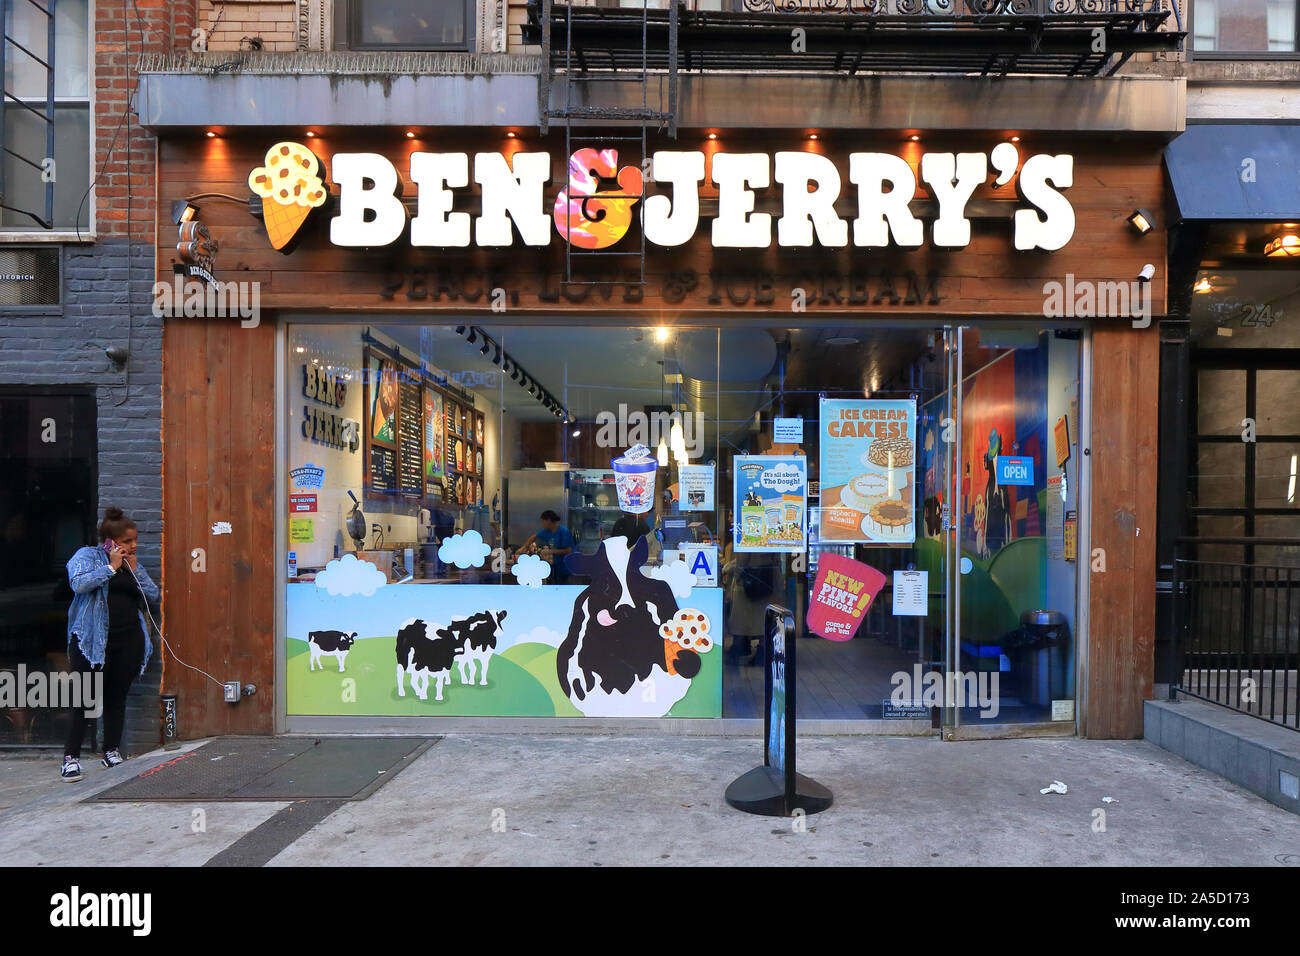 [historical storefront] Ben & Jerry’s, 24 St Marks Place, New York, NYC storefront photo of an ice cream shop in Manhattan's East Village. Stock Photo